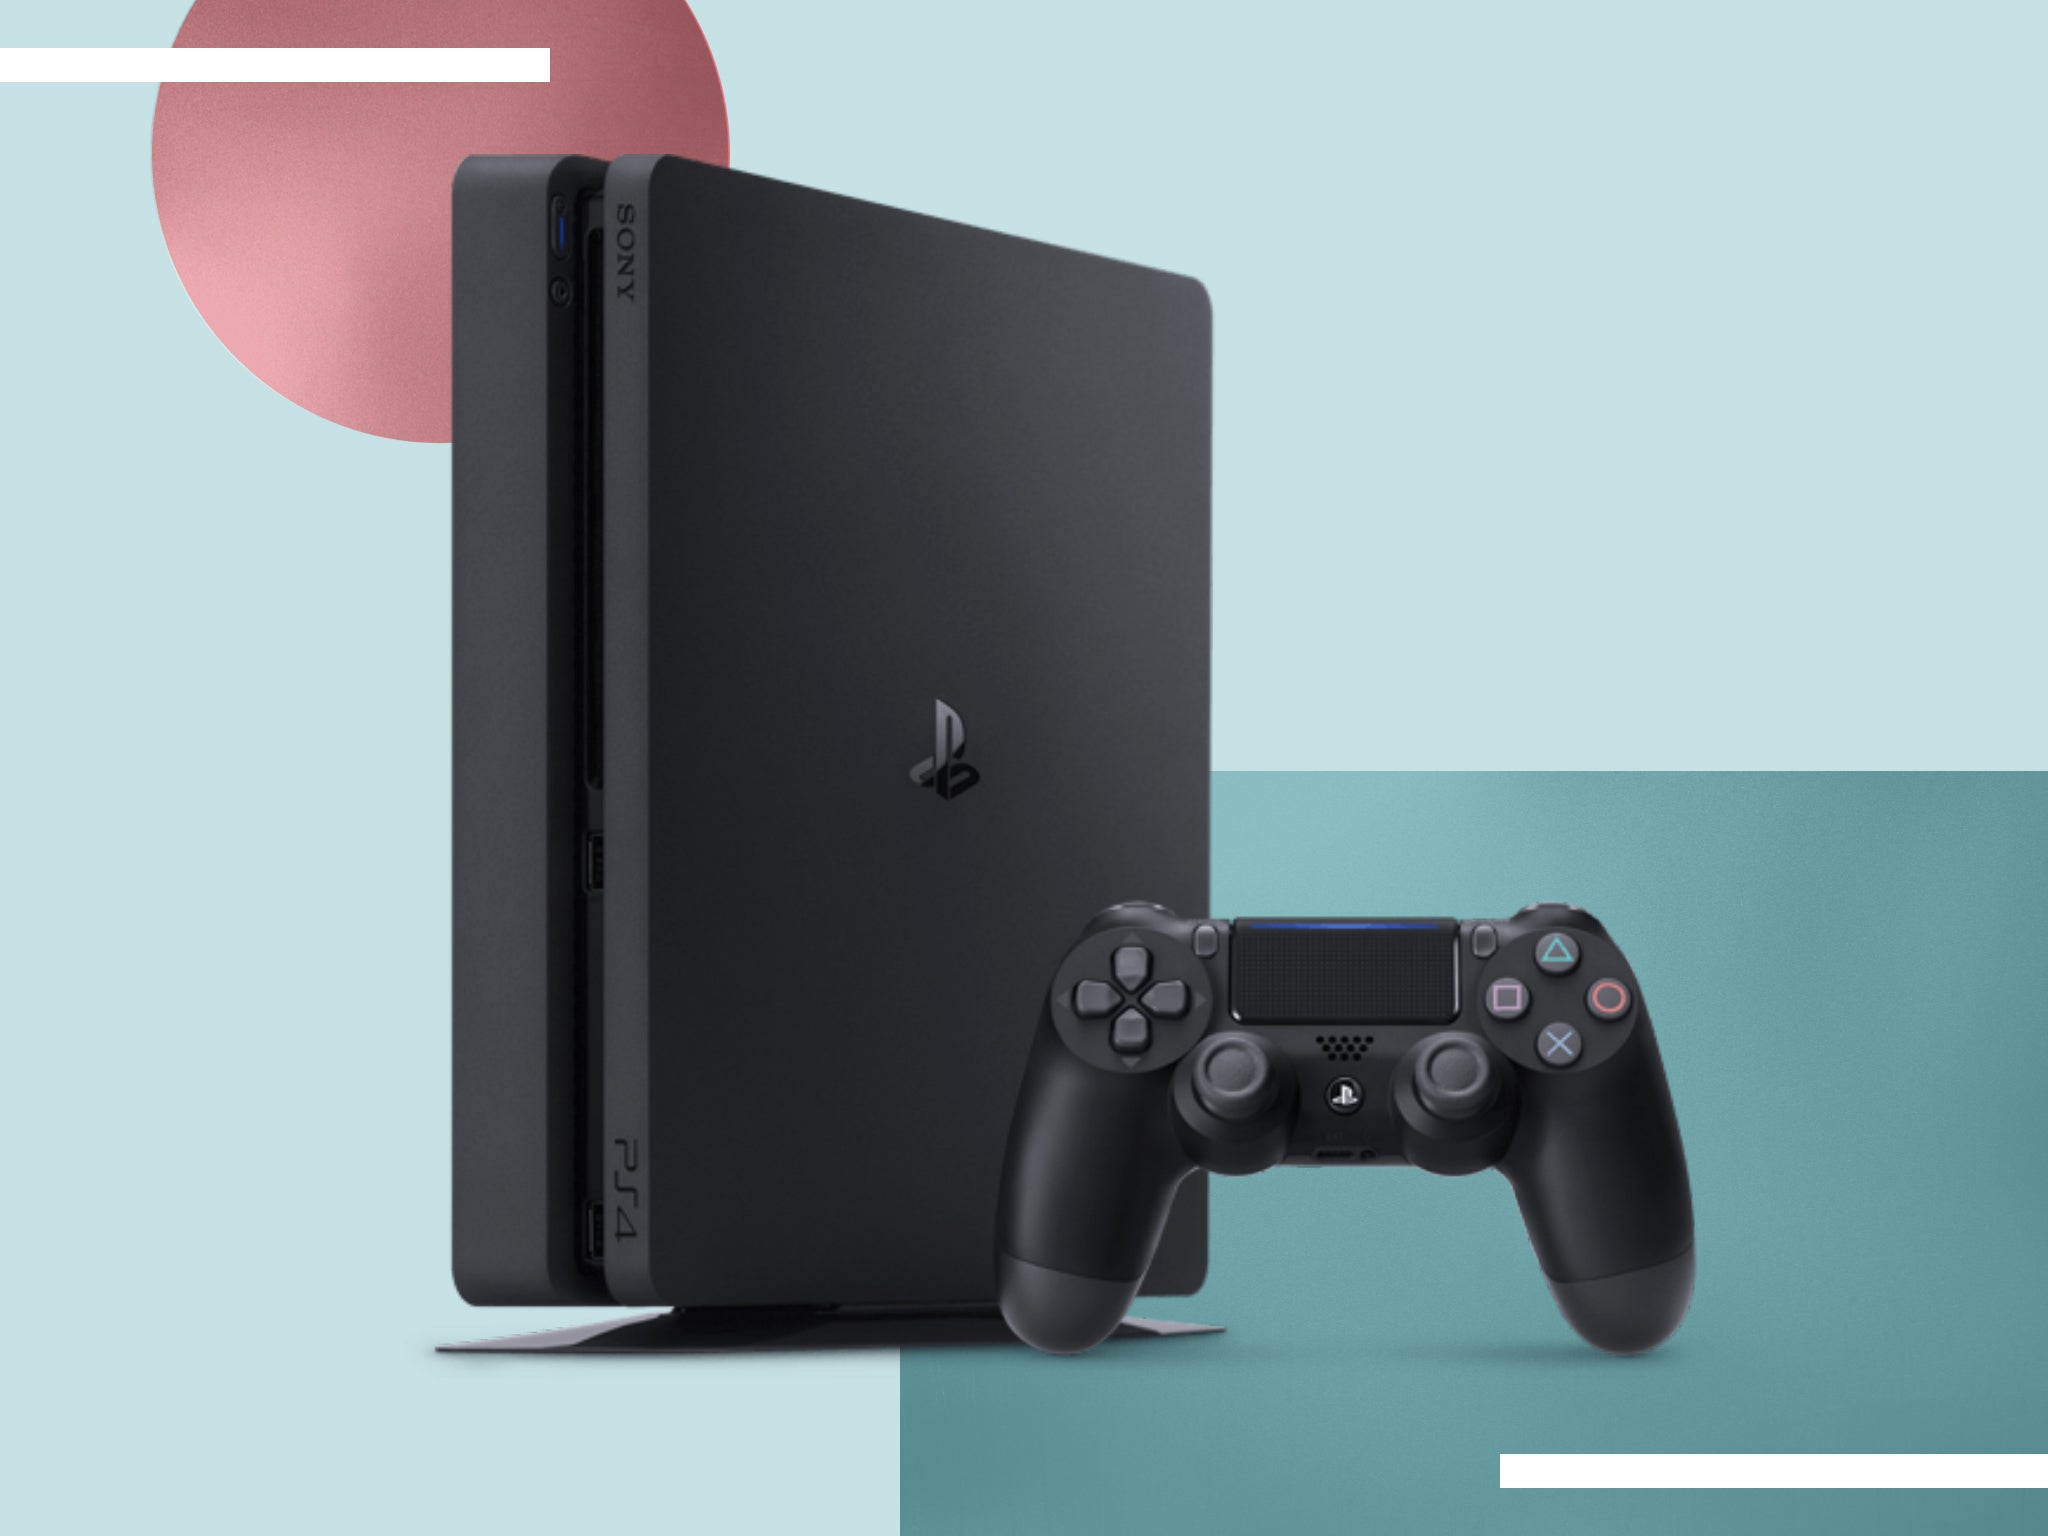 The Sony PS4 will likely be discounted for Black Friday 2021